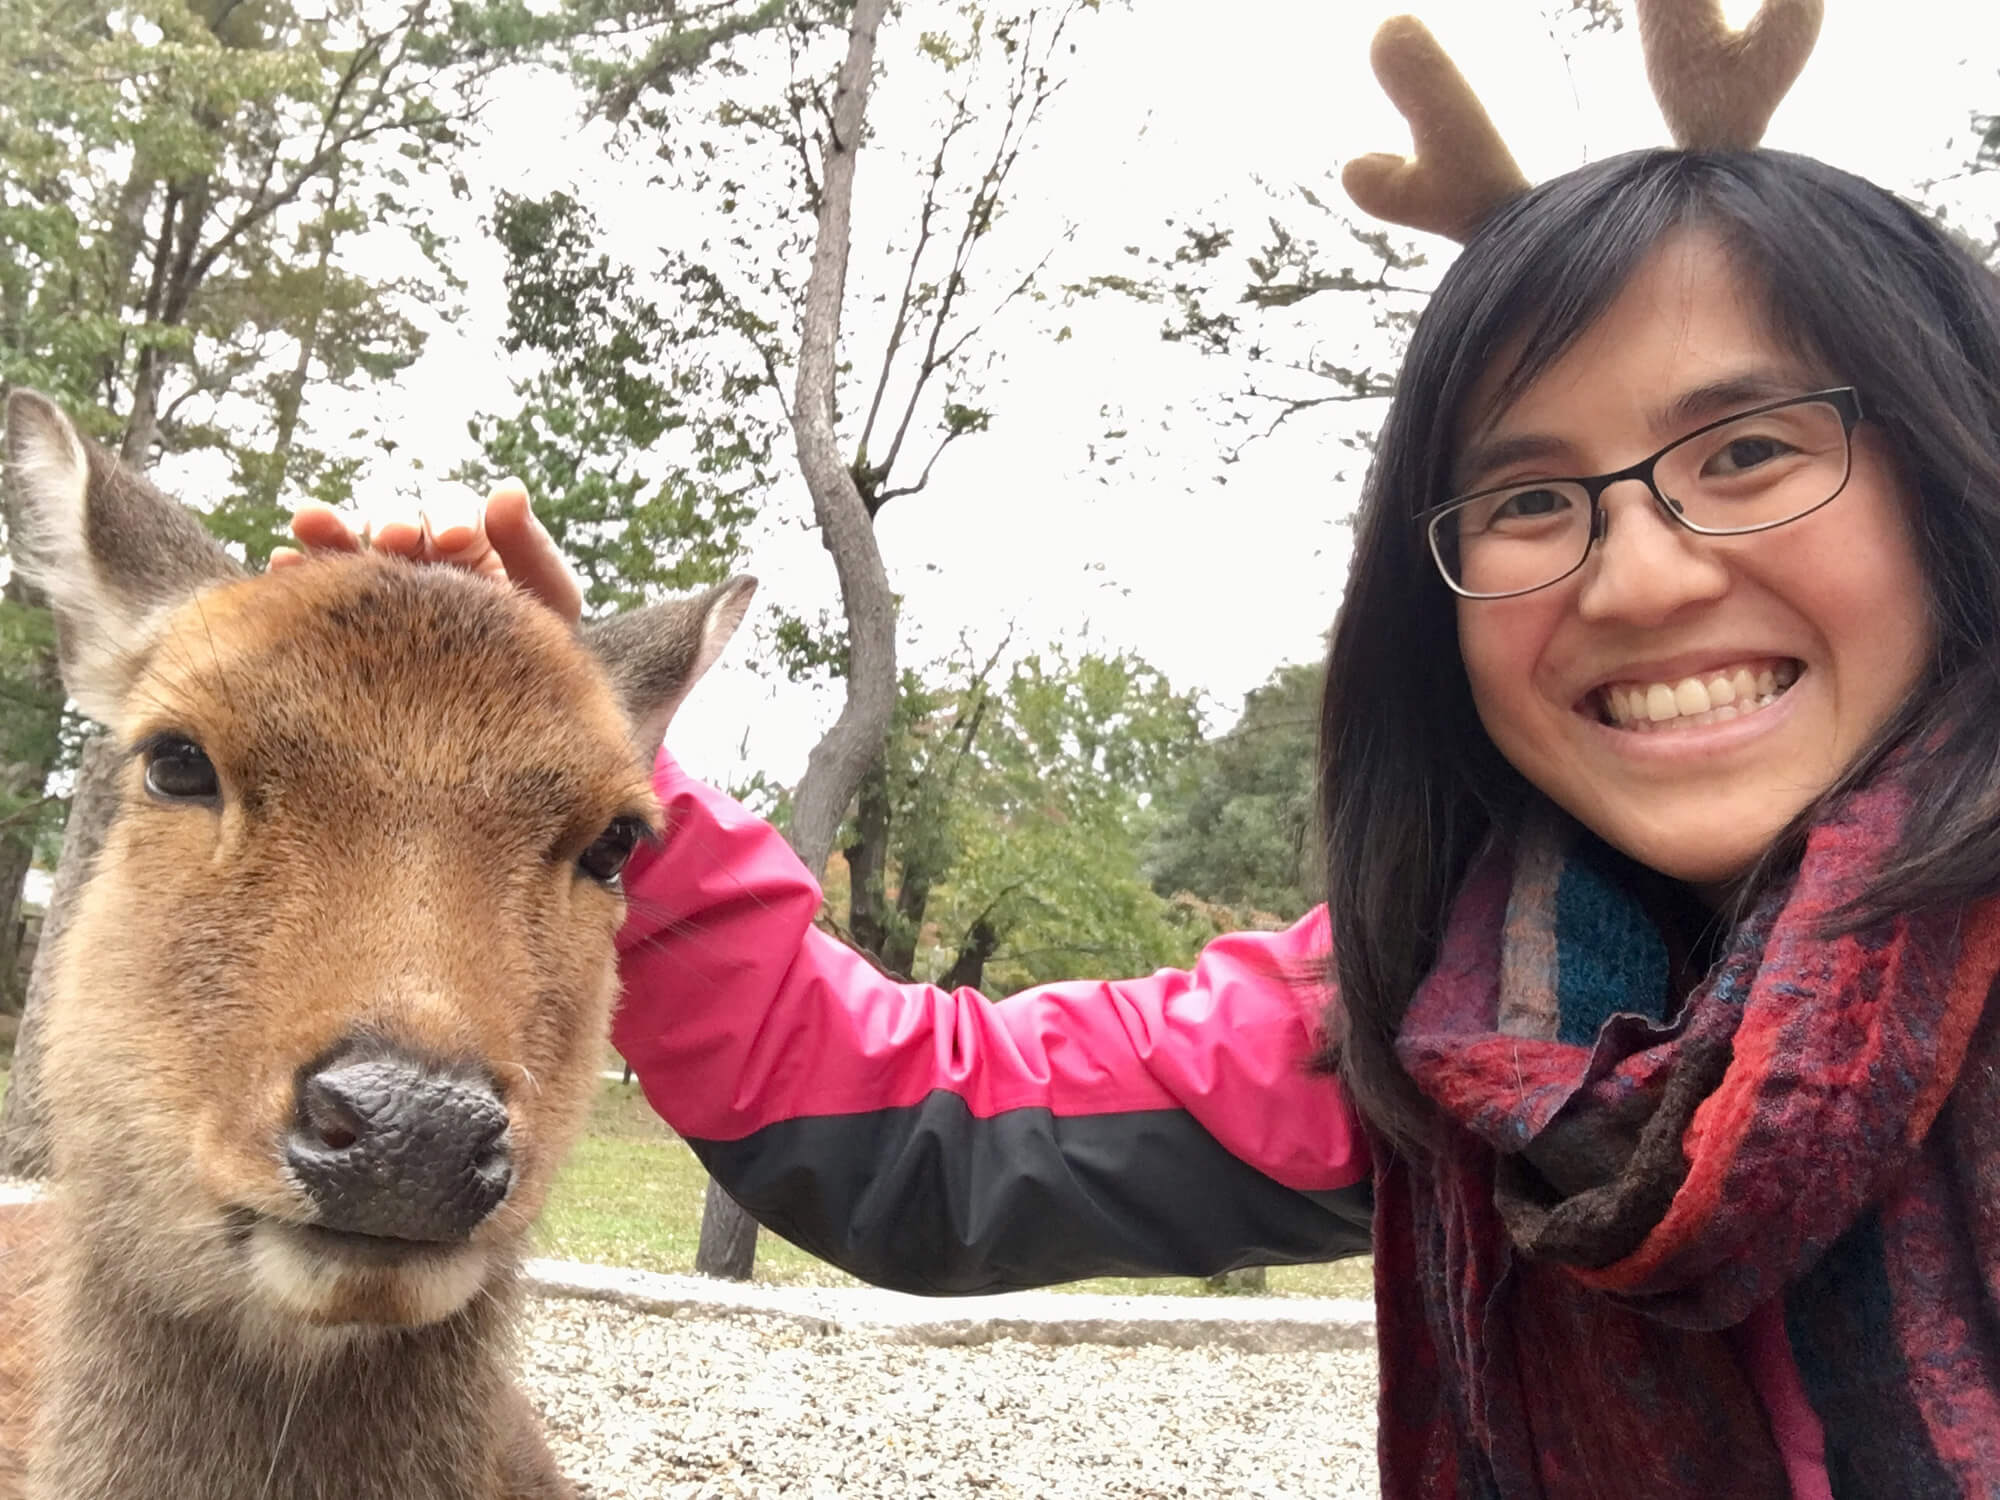 A woman with glasses, smiling and patting a deer